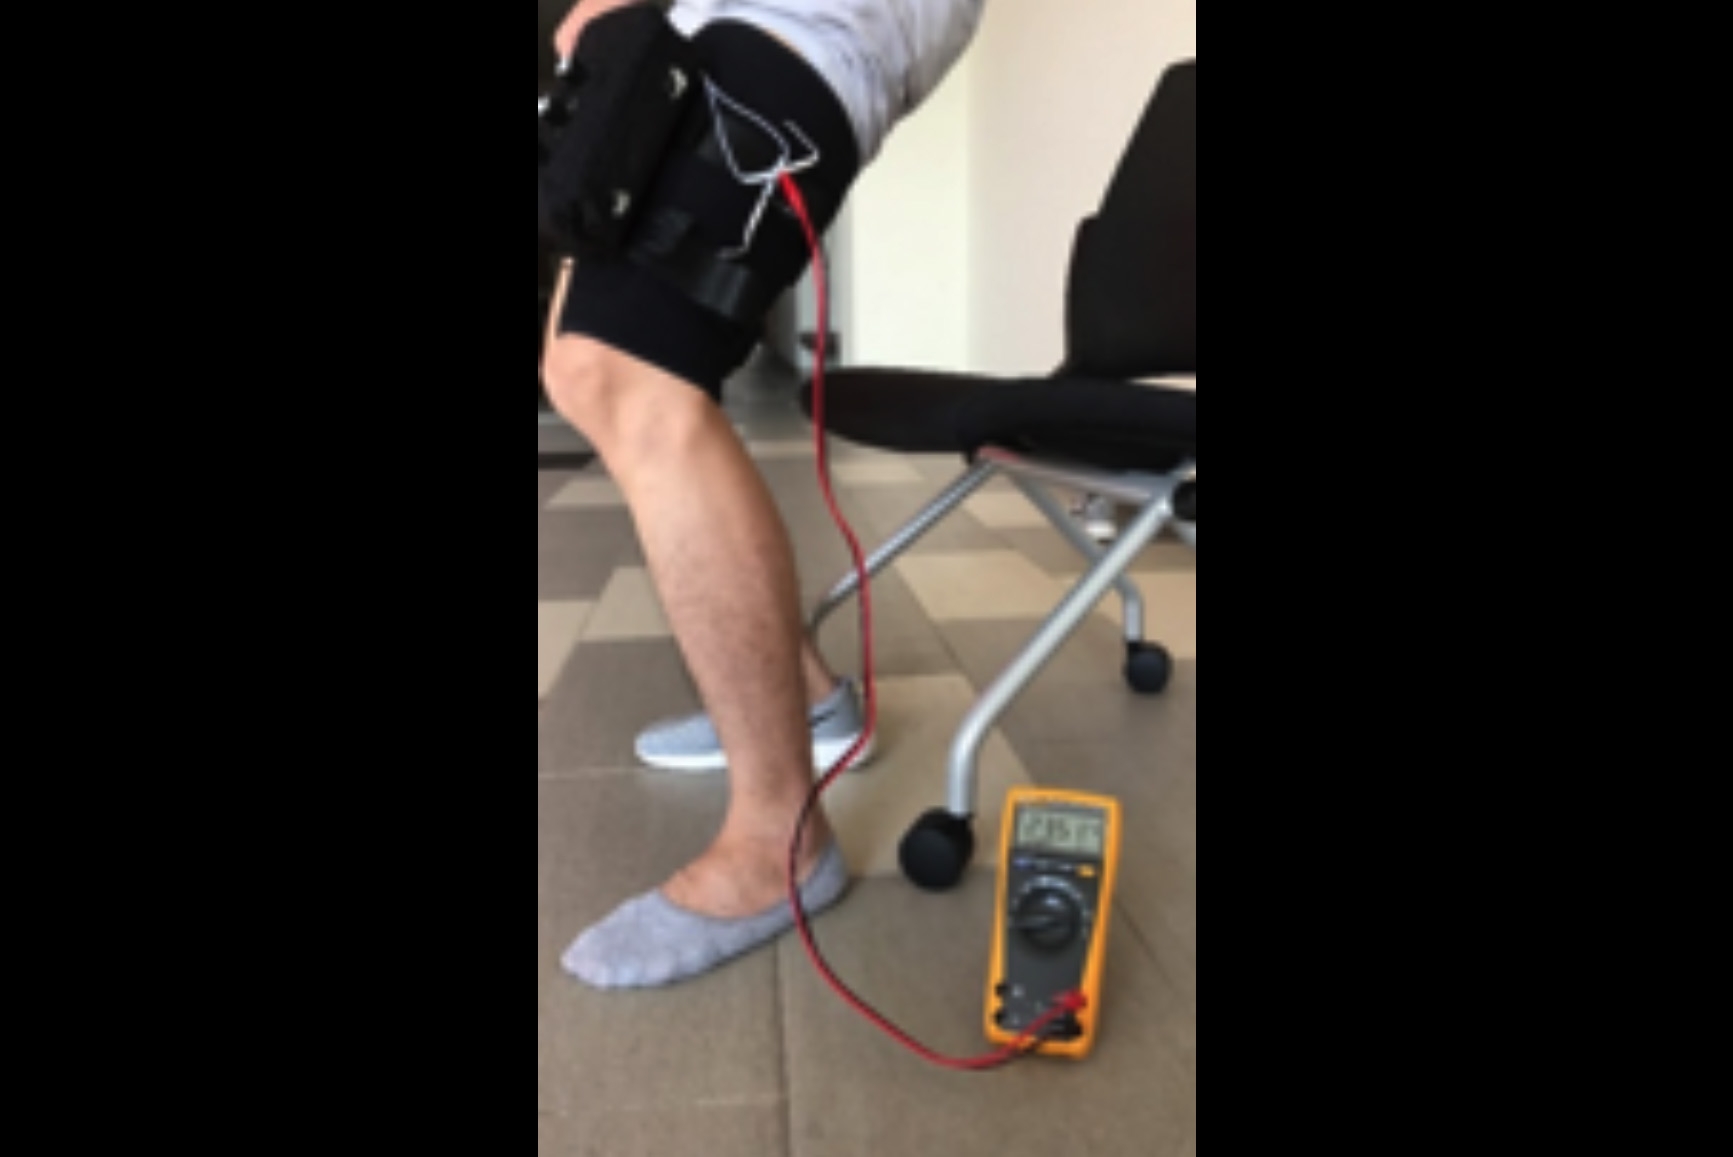 Measuring of electrical stimulation intensity during use